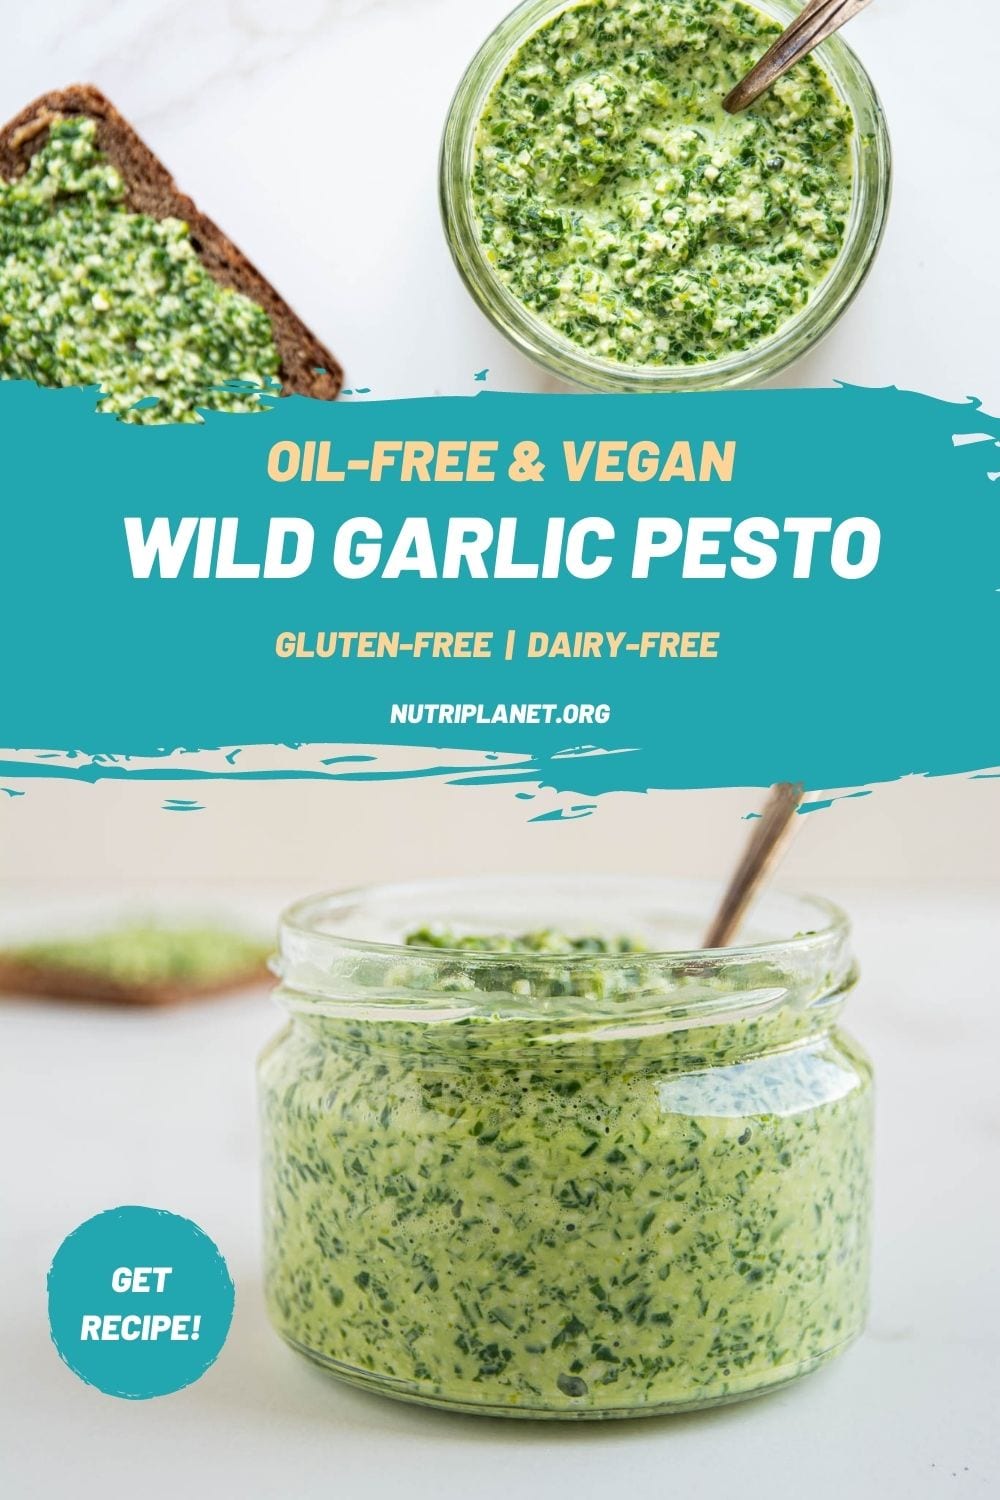 Learn how to make vegan oil-free wild garlic pesto with just 4 ingredients (not counting salt and water). Spread it on a slice of sourdough bread, make pesto pasta or add to salads, stews and Buddha bowls. 